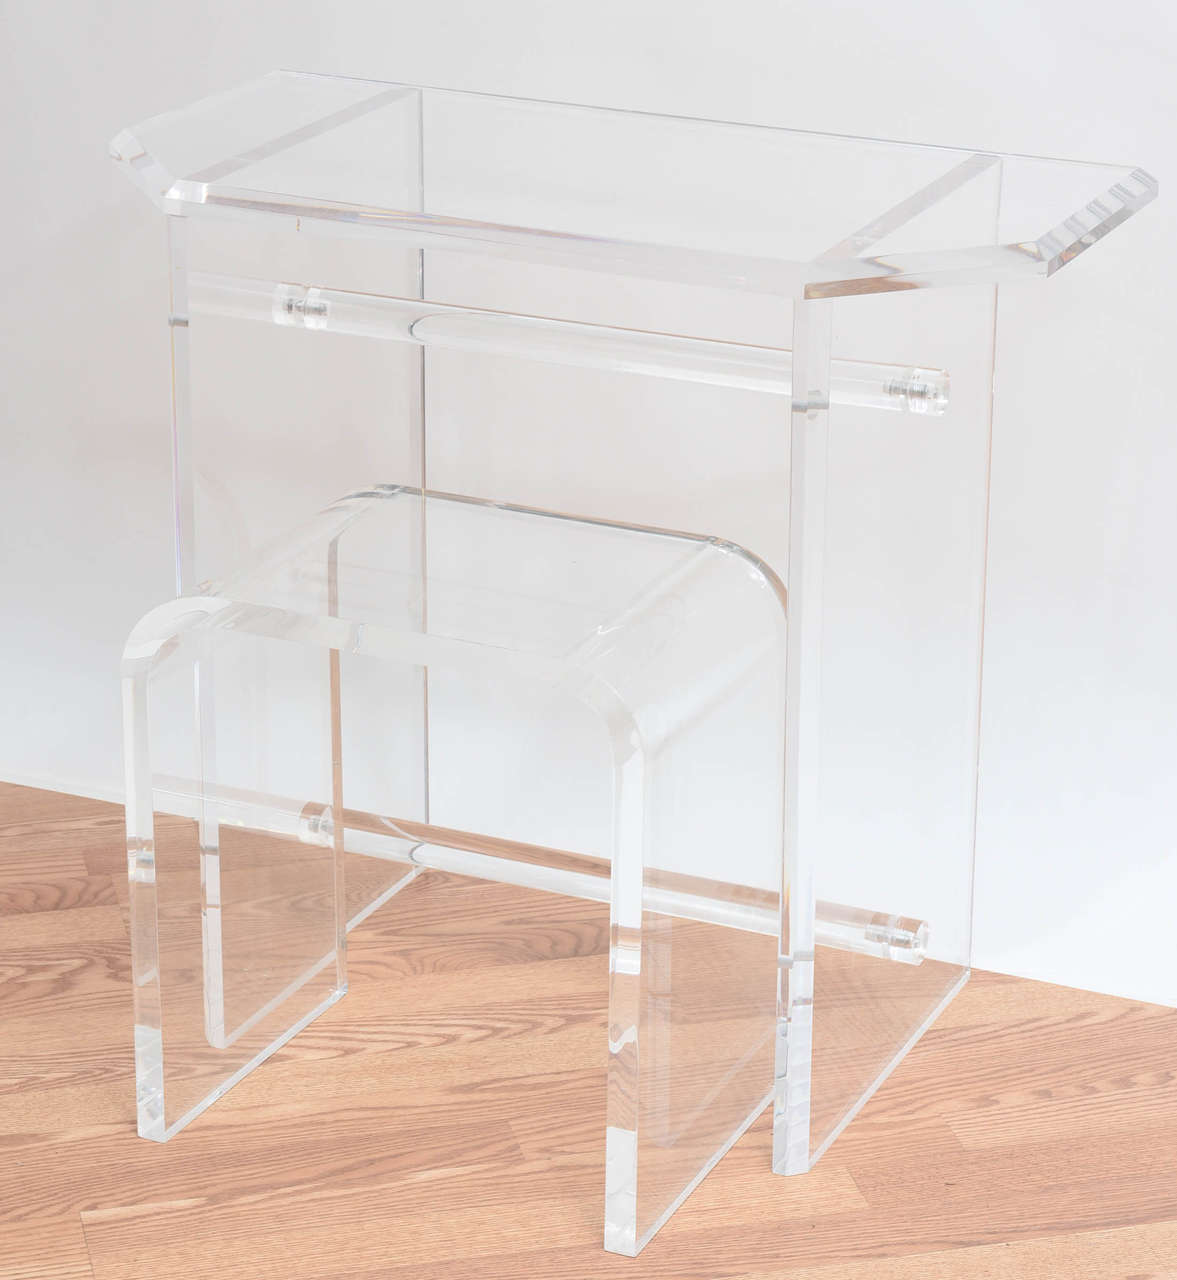 Chic Lucite vanity table with waterfall seat.